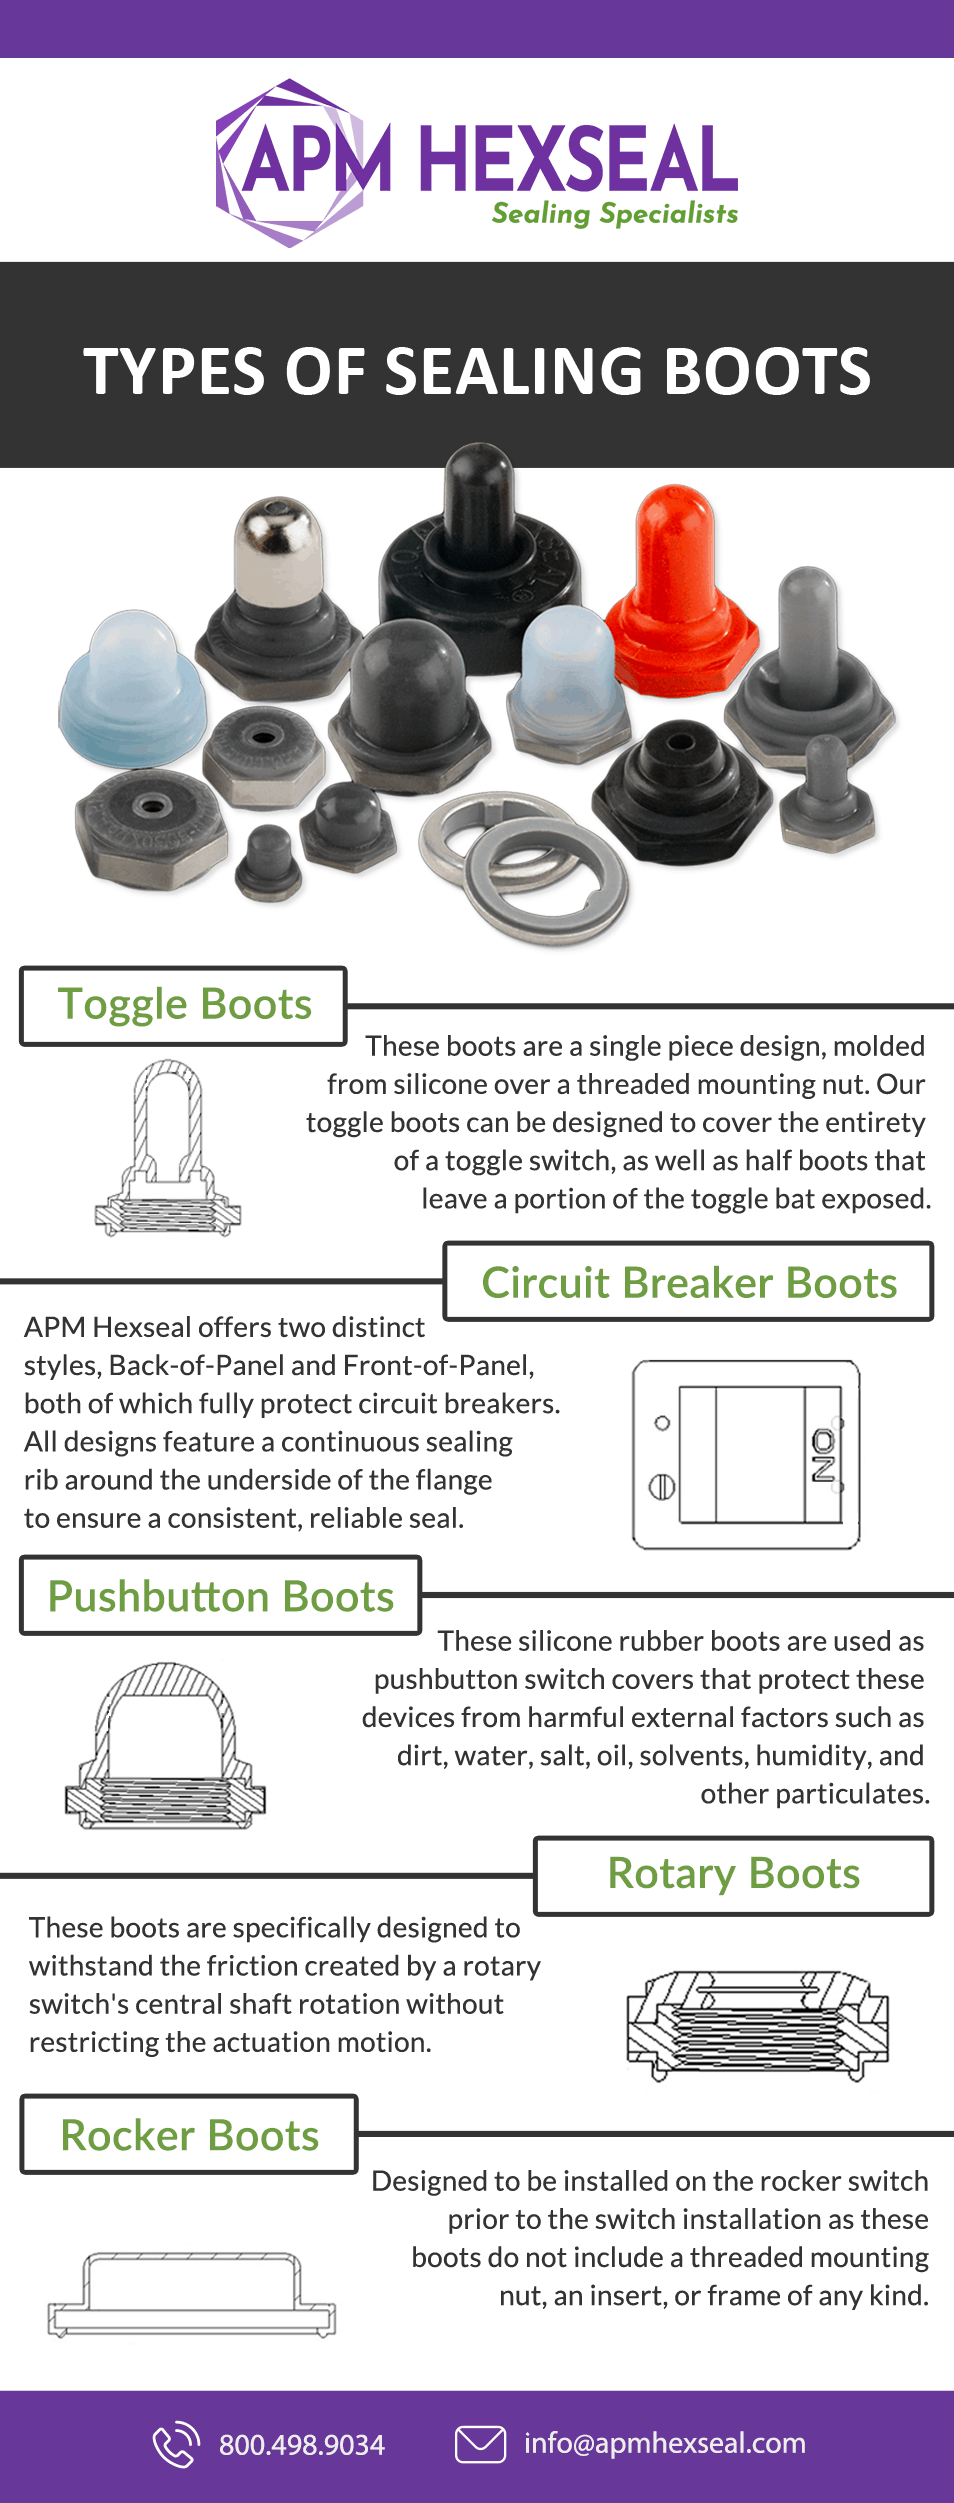 Types of Sealing Boots Infographic